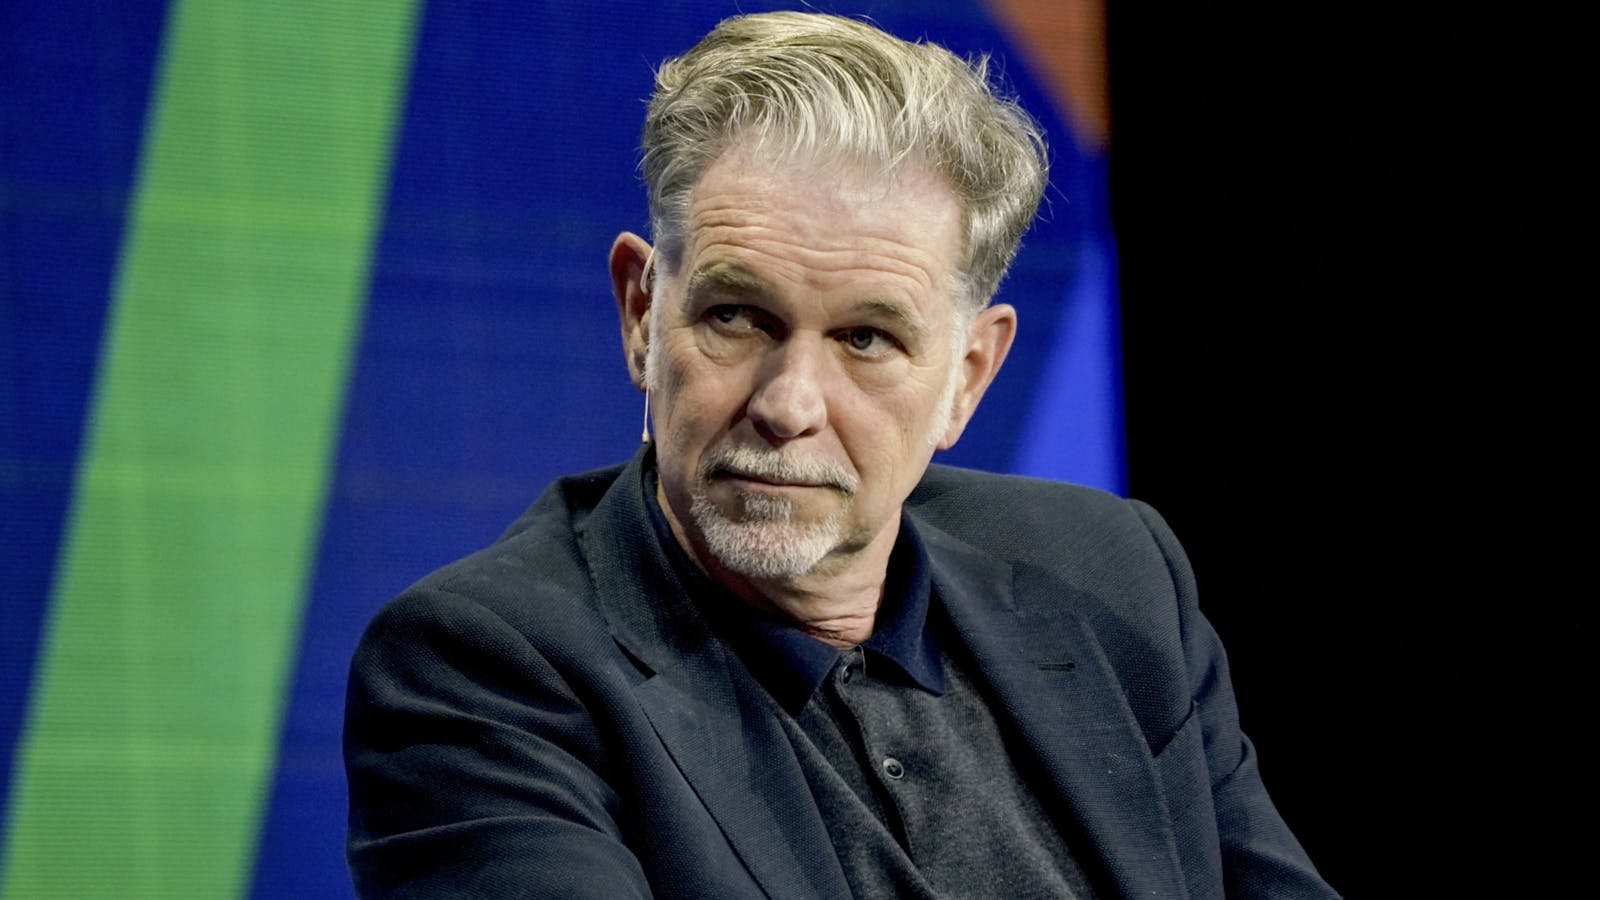 Reed Hastings. Photo by Bloomberg.